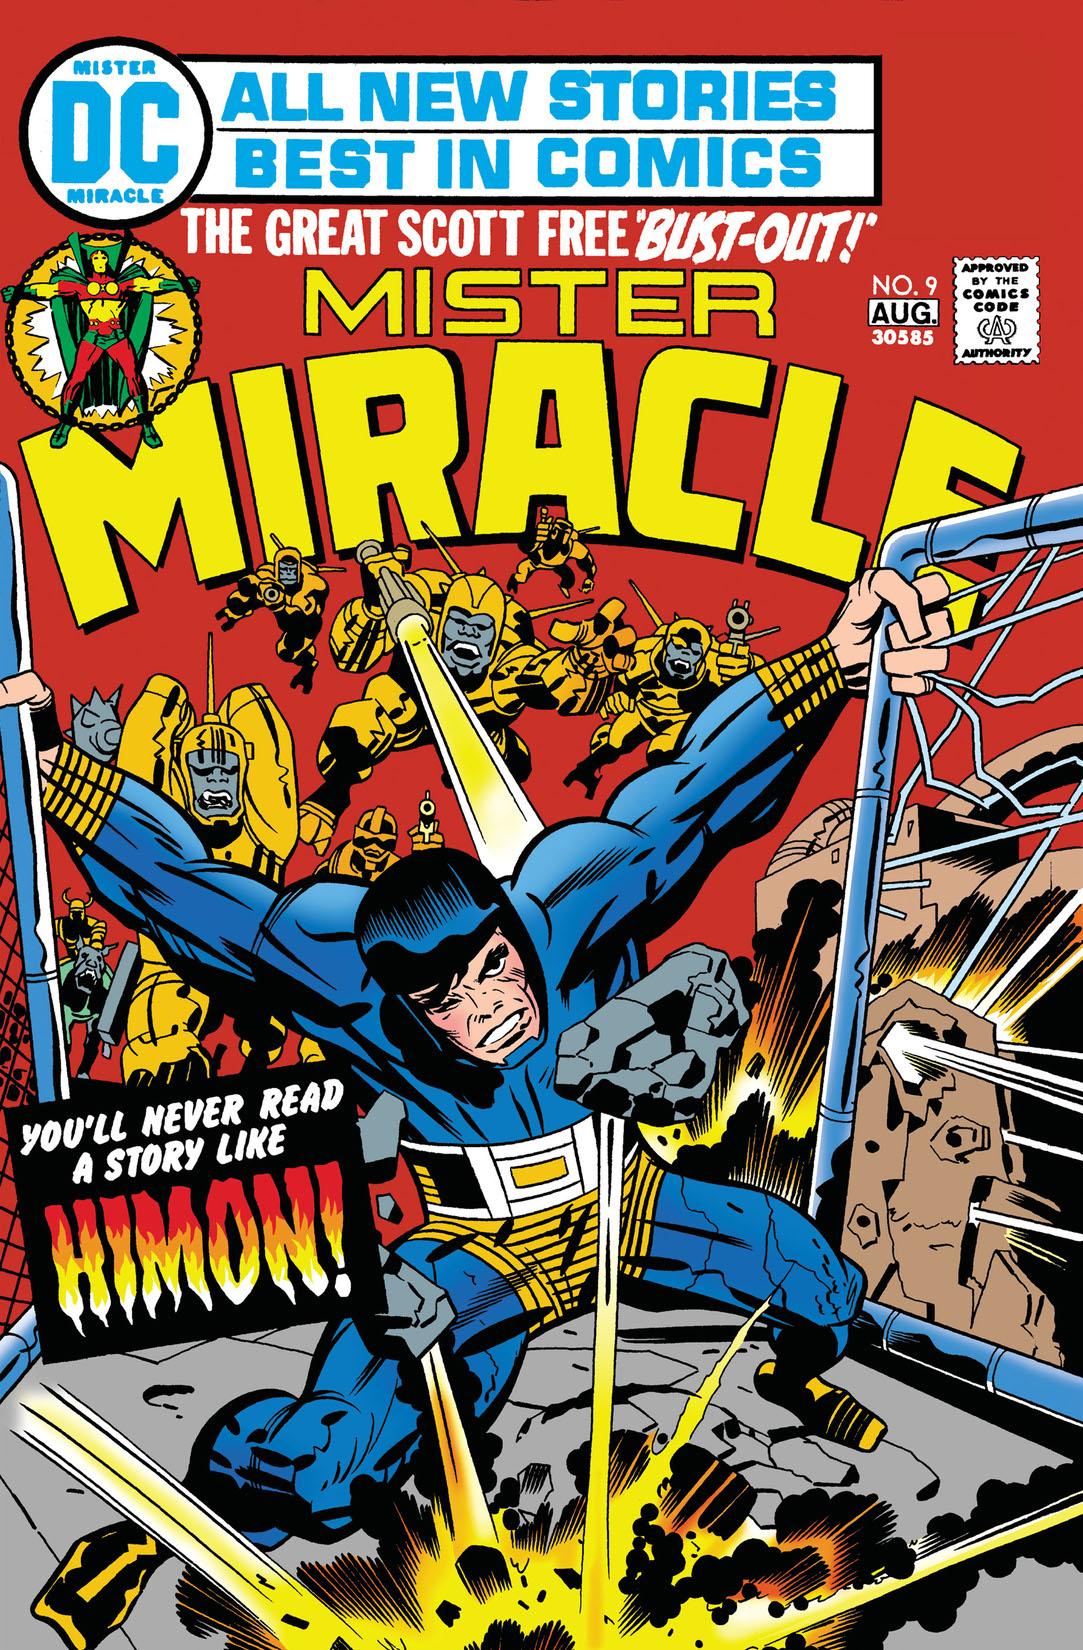 Mister Miracle (1971-) #9 preview images